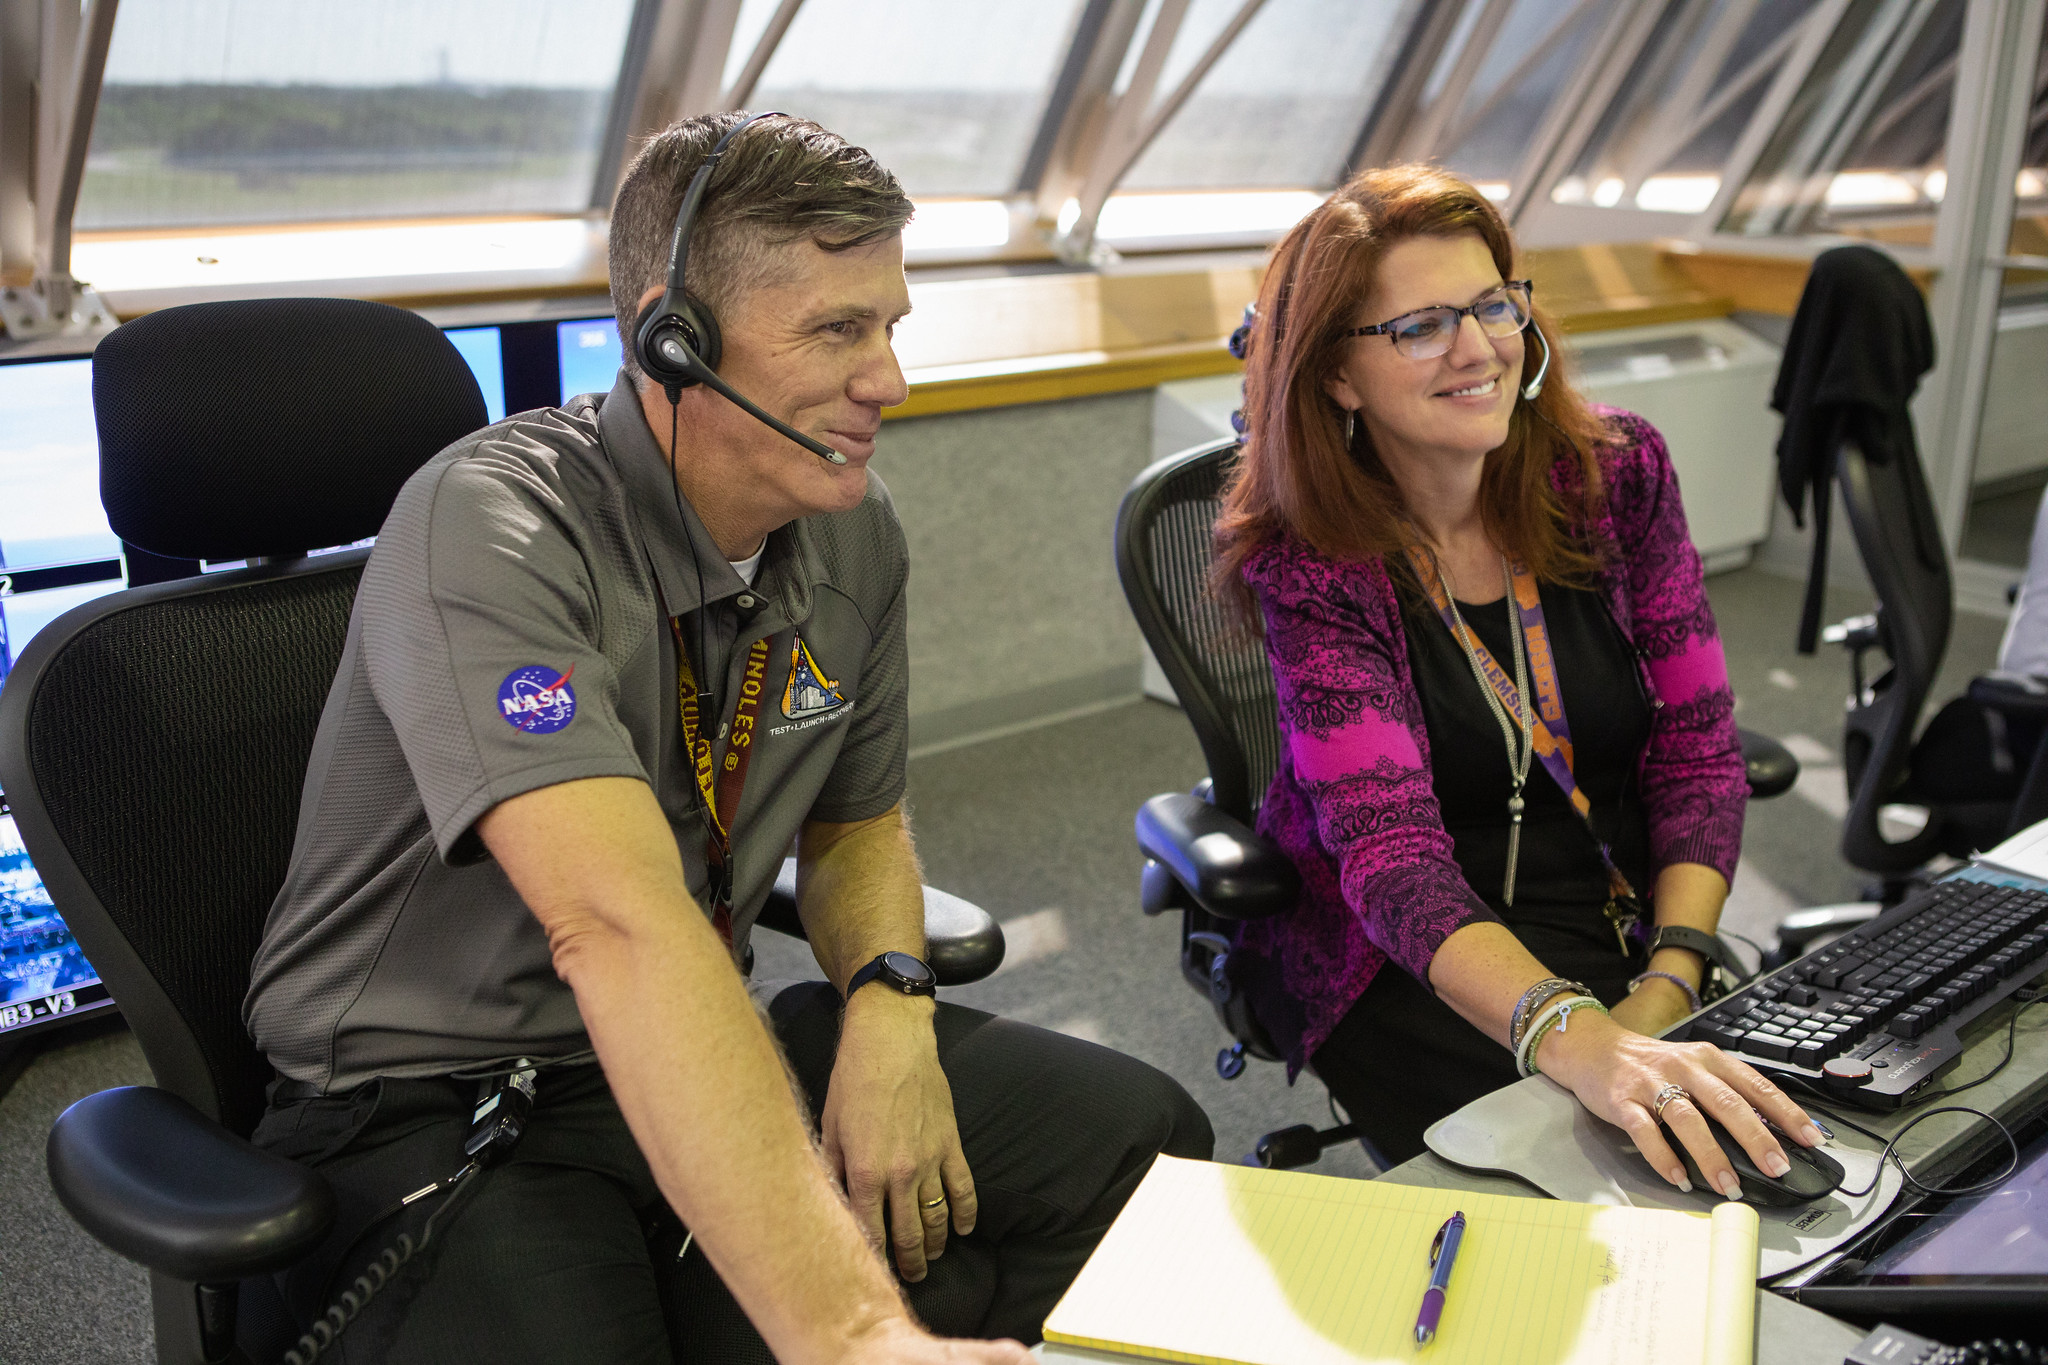 Jeremy Graeber and Charlie Blackwell-Thompson participate in validation testing inside Firing Room 1 on July 11, 2019.